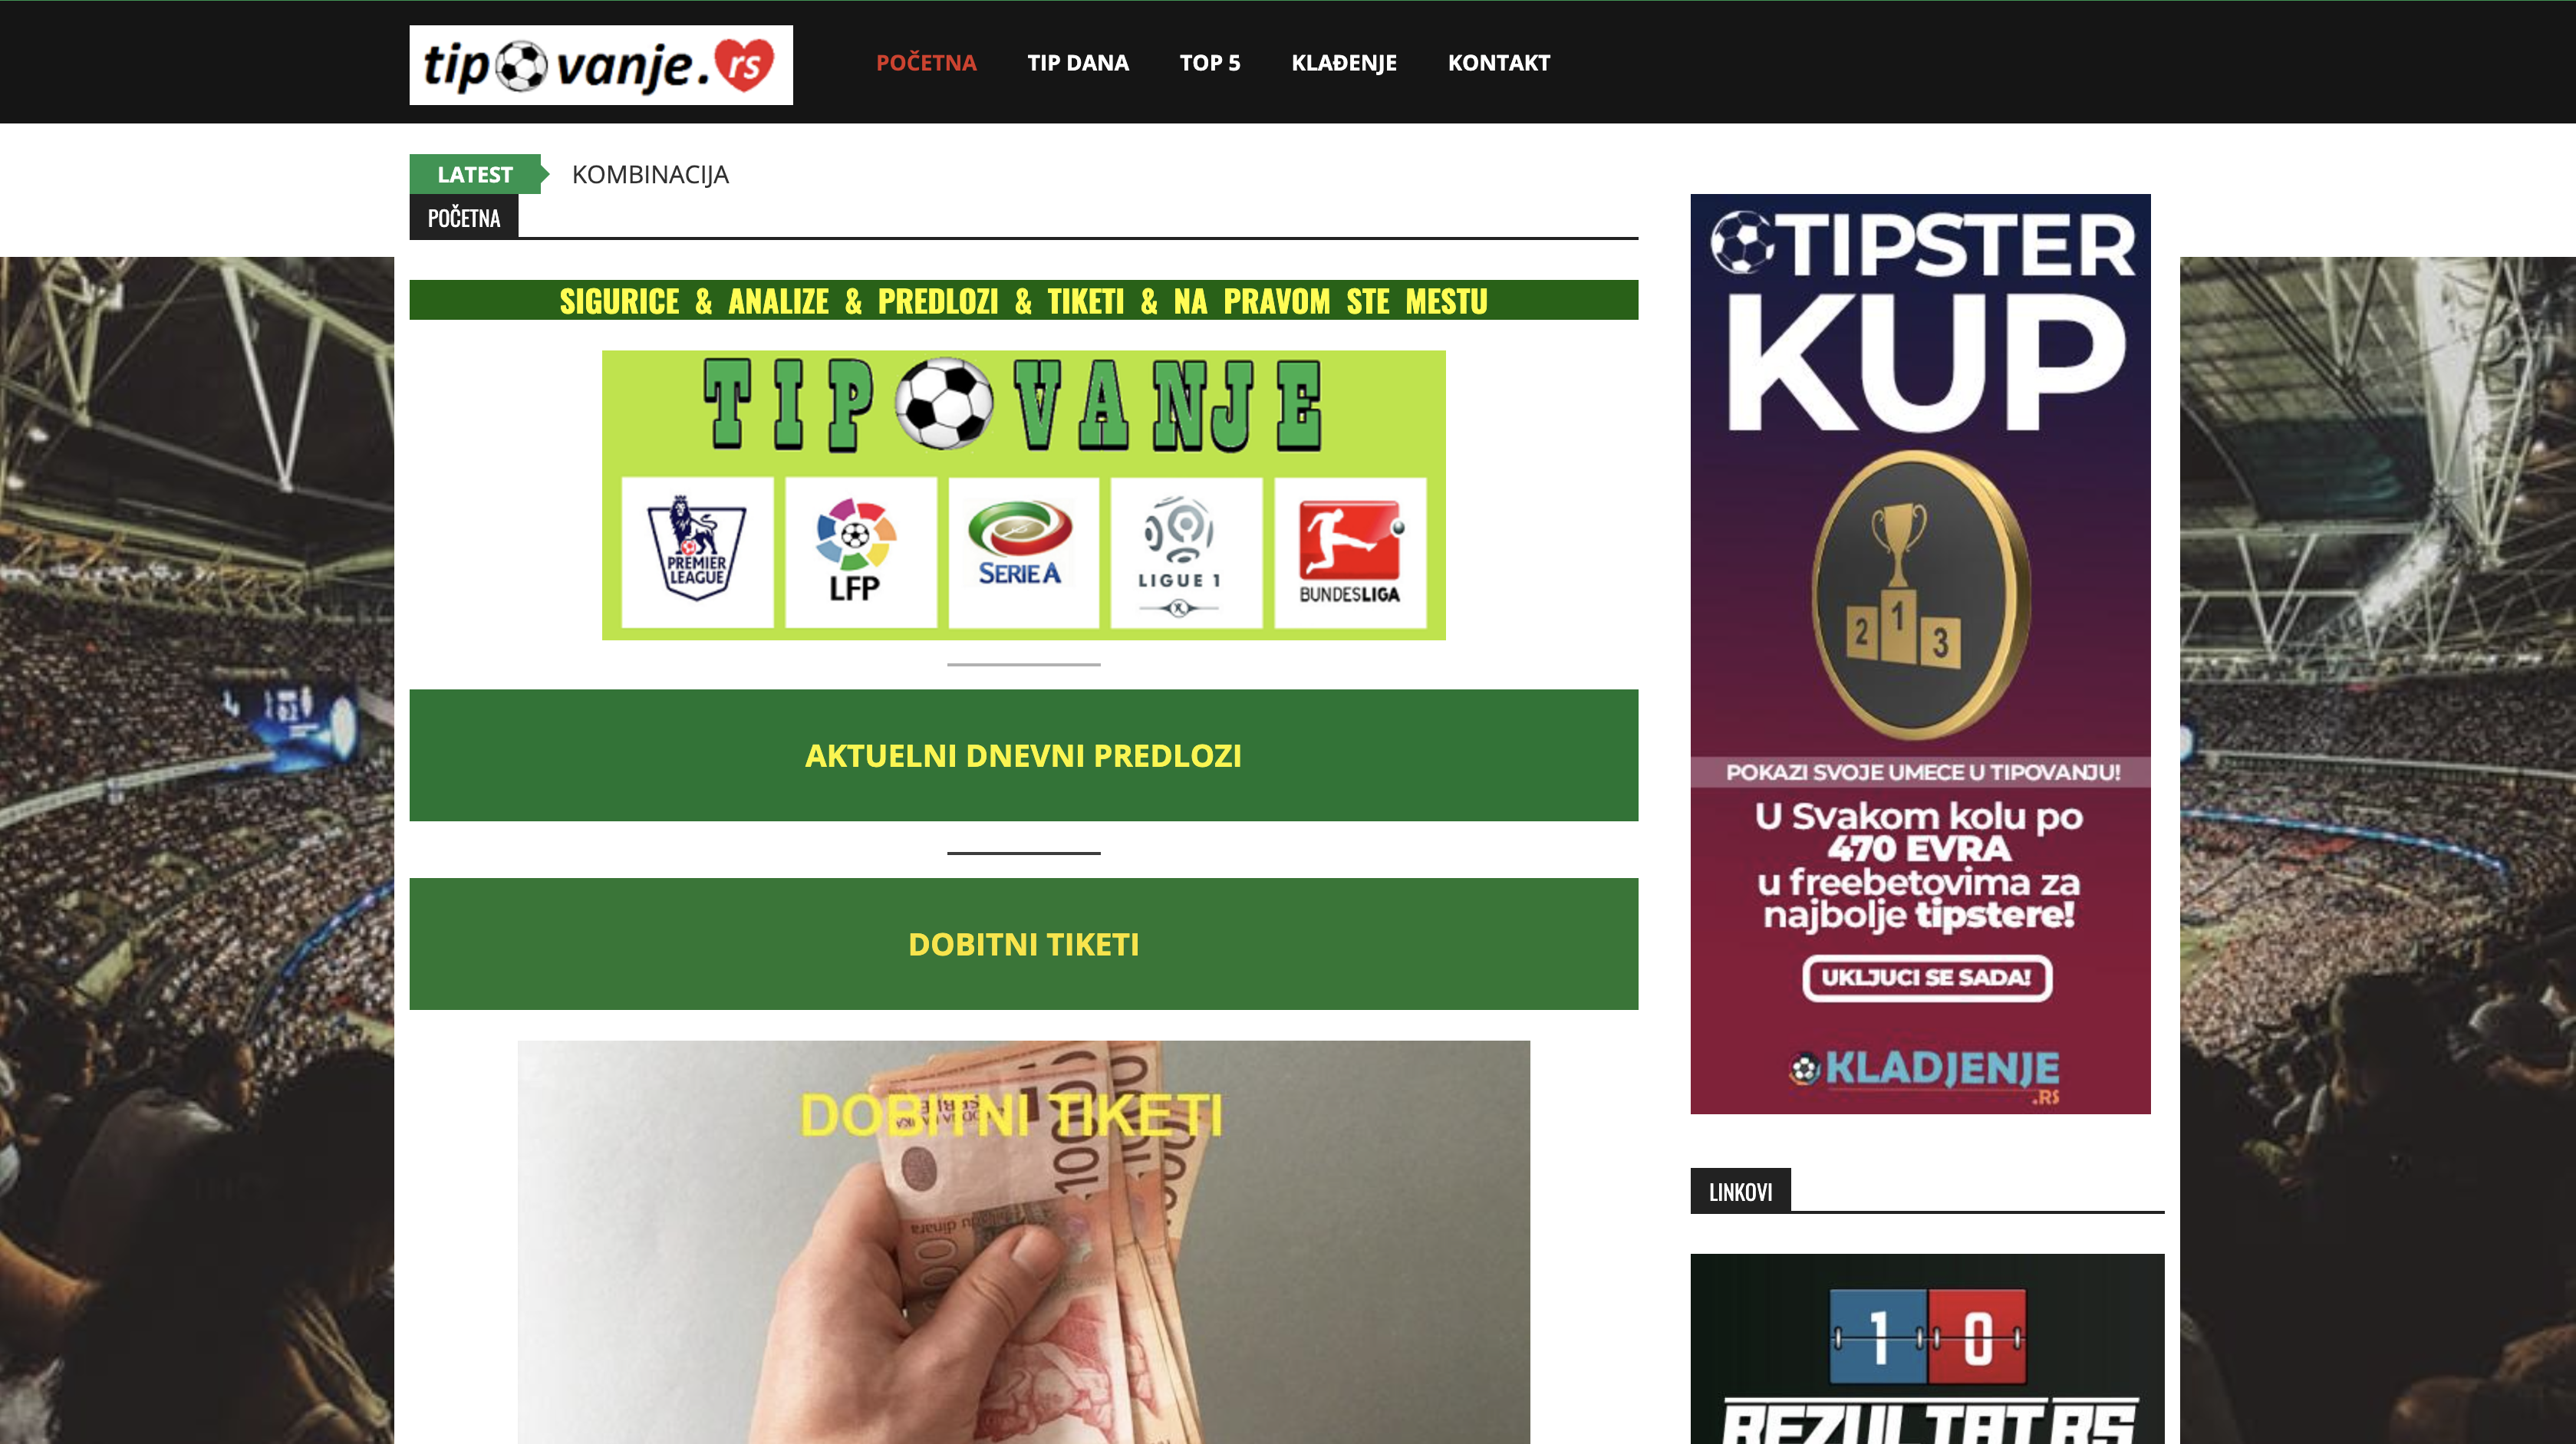 BMG acquires Serbian betting tips website Tipovanje.rs